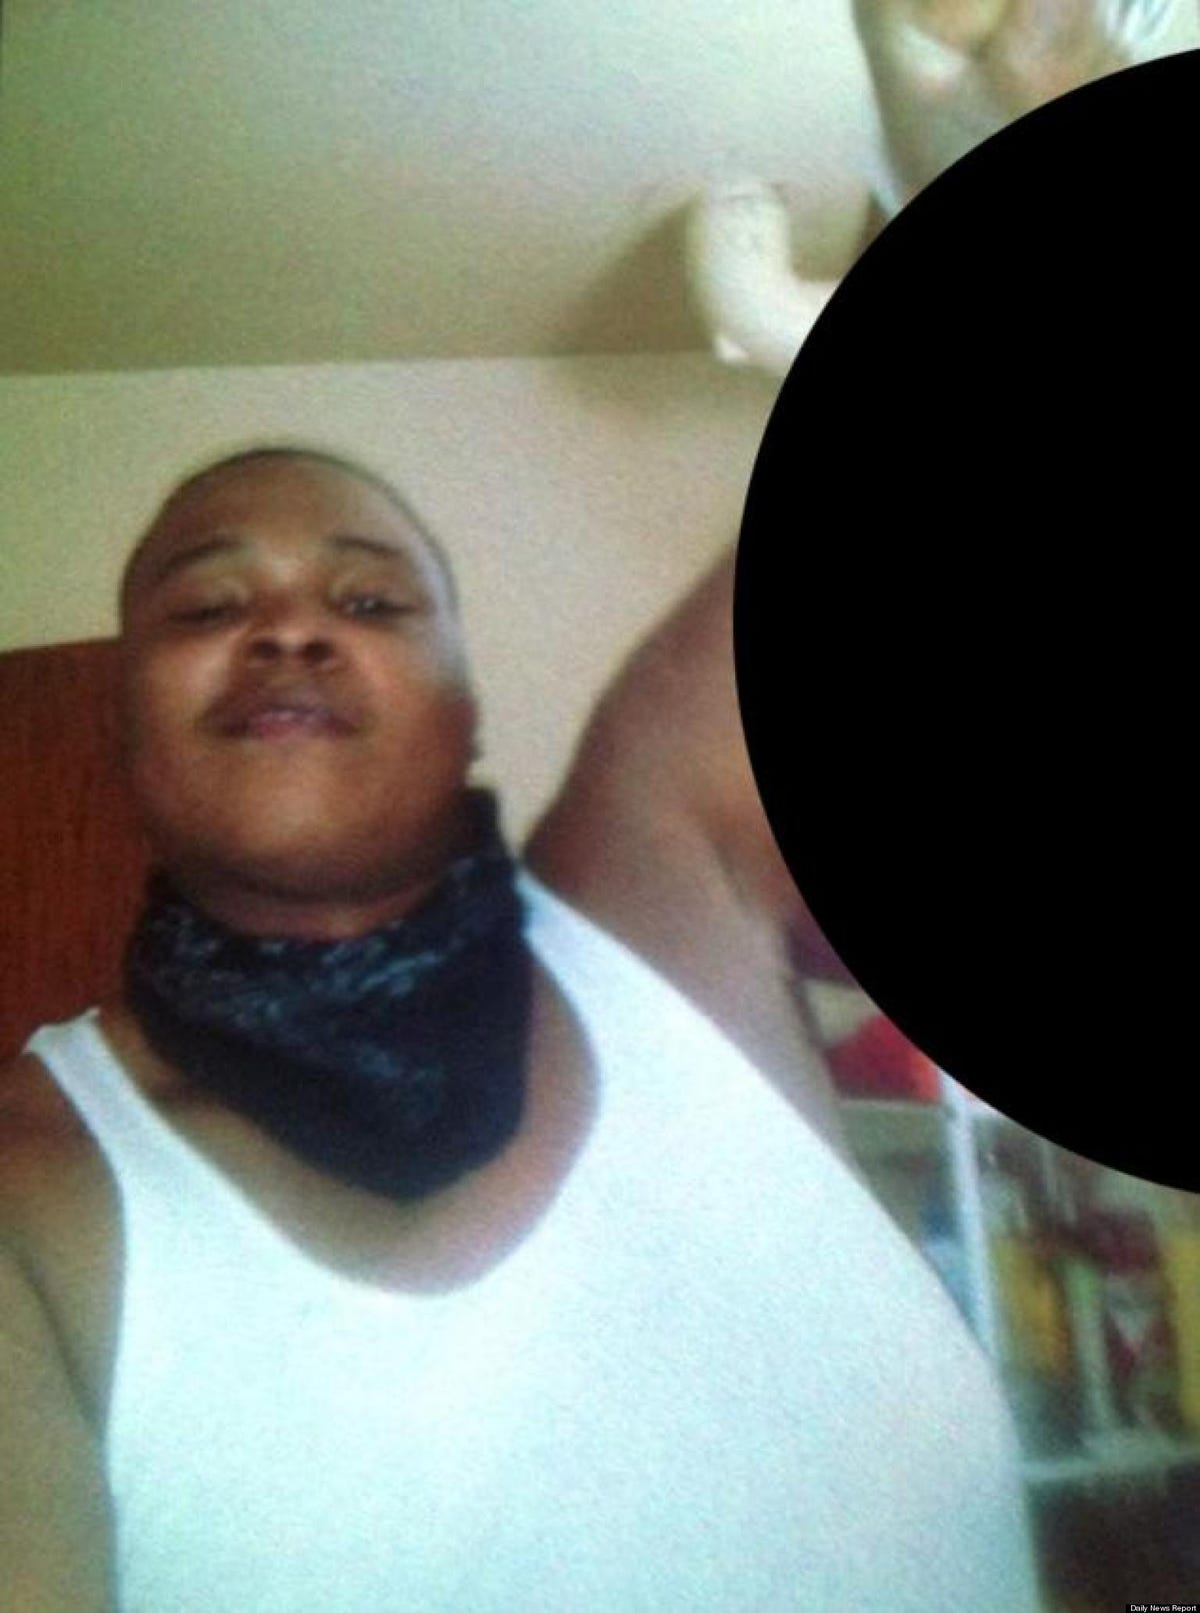 Photo: Son posed with mother's severed head